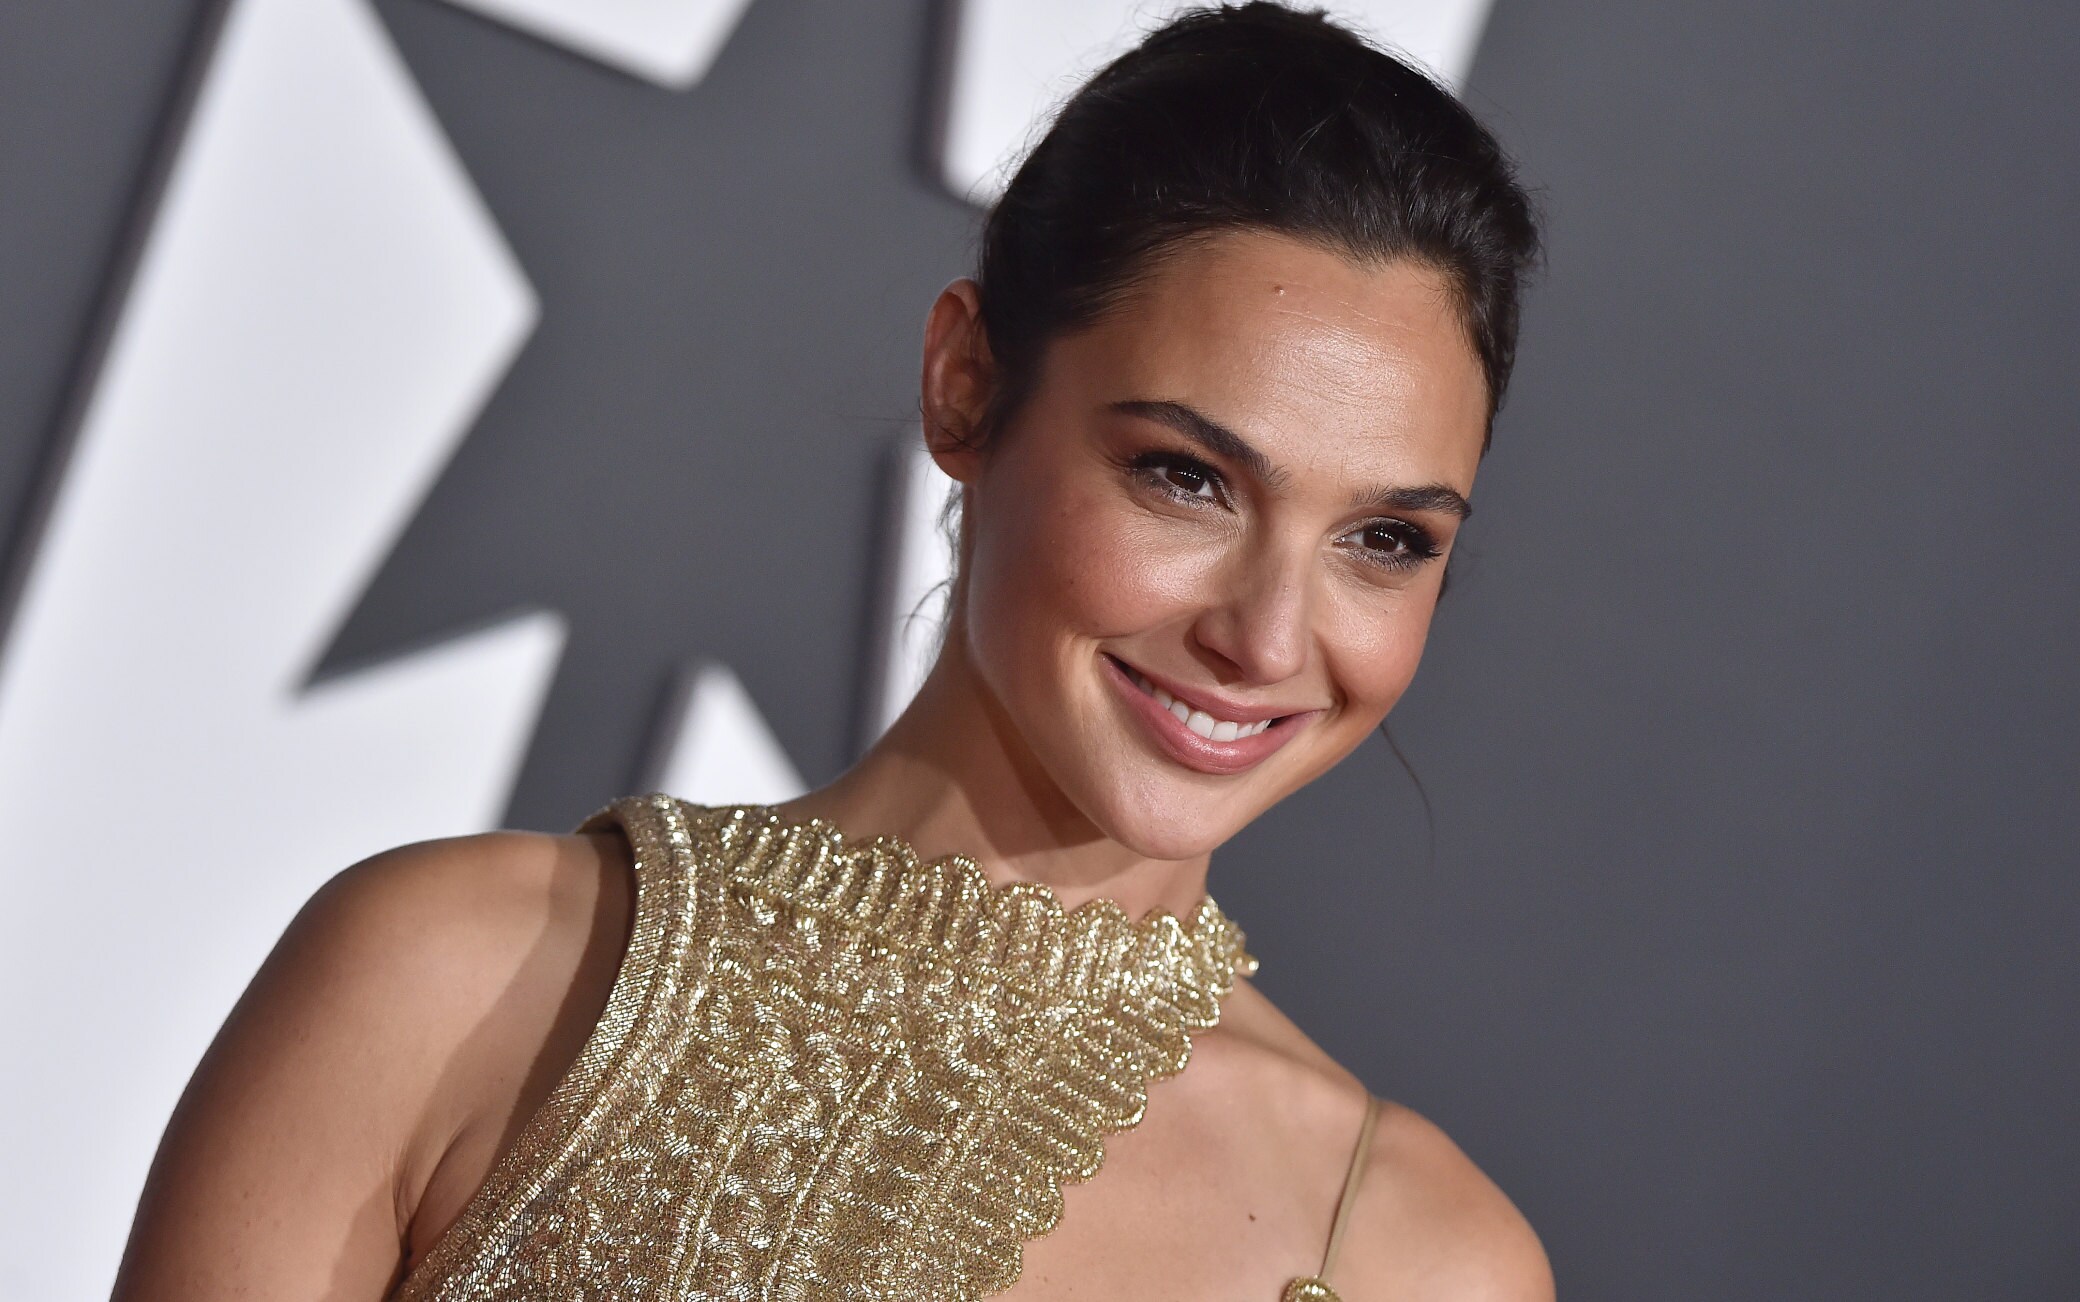 Heart of Stone: Gal Gadot publishes the first photos from the set